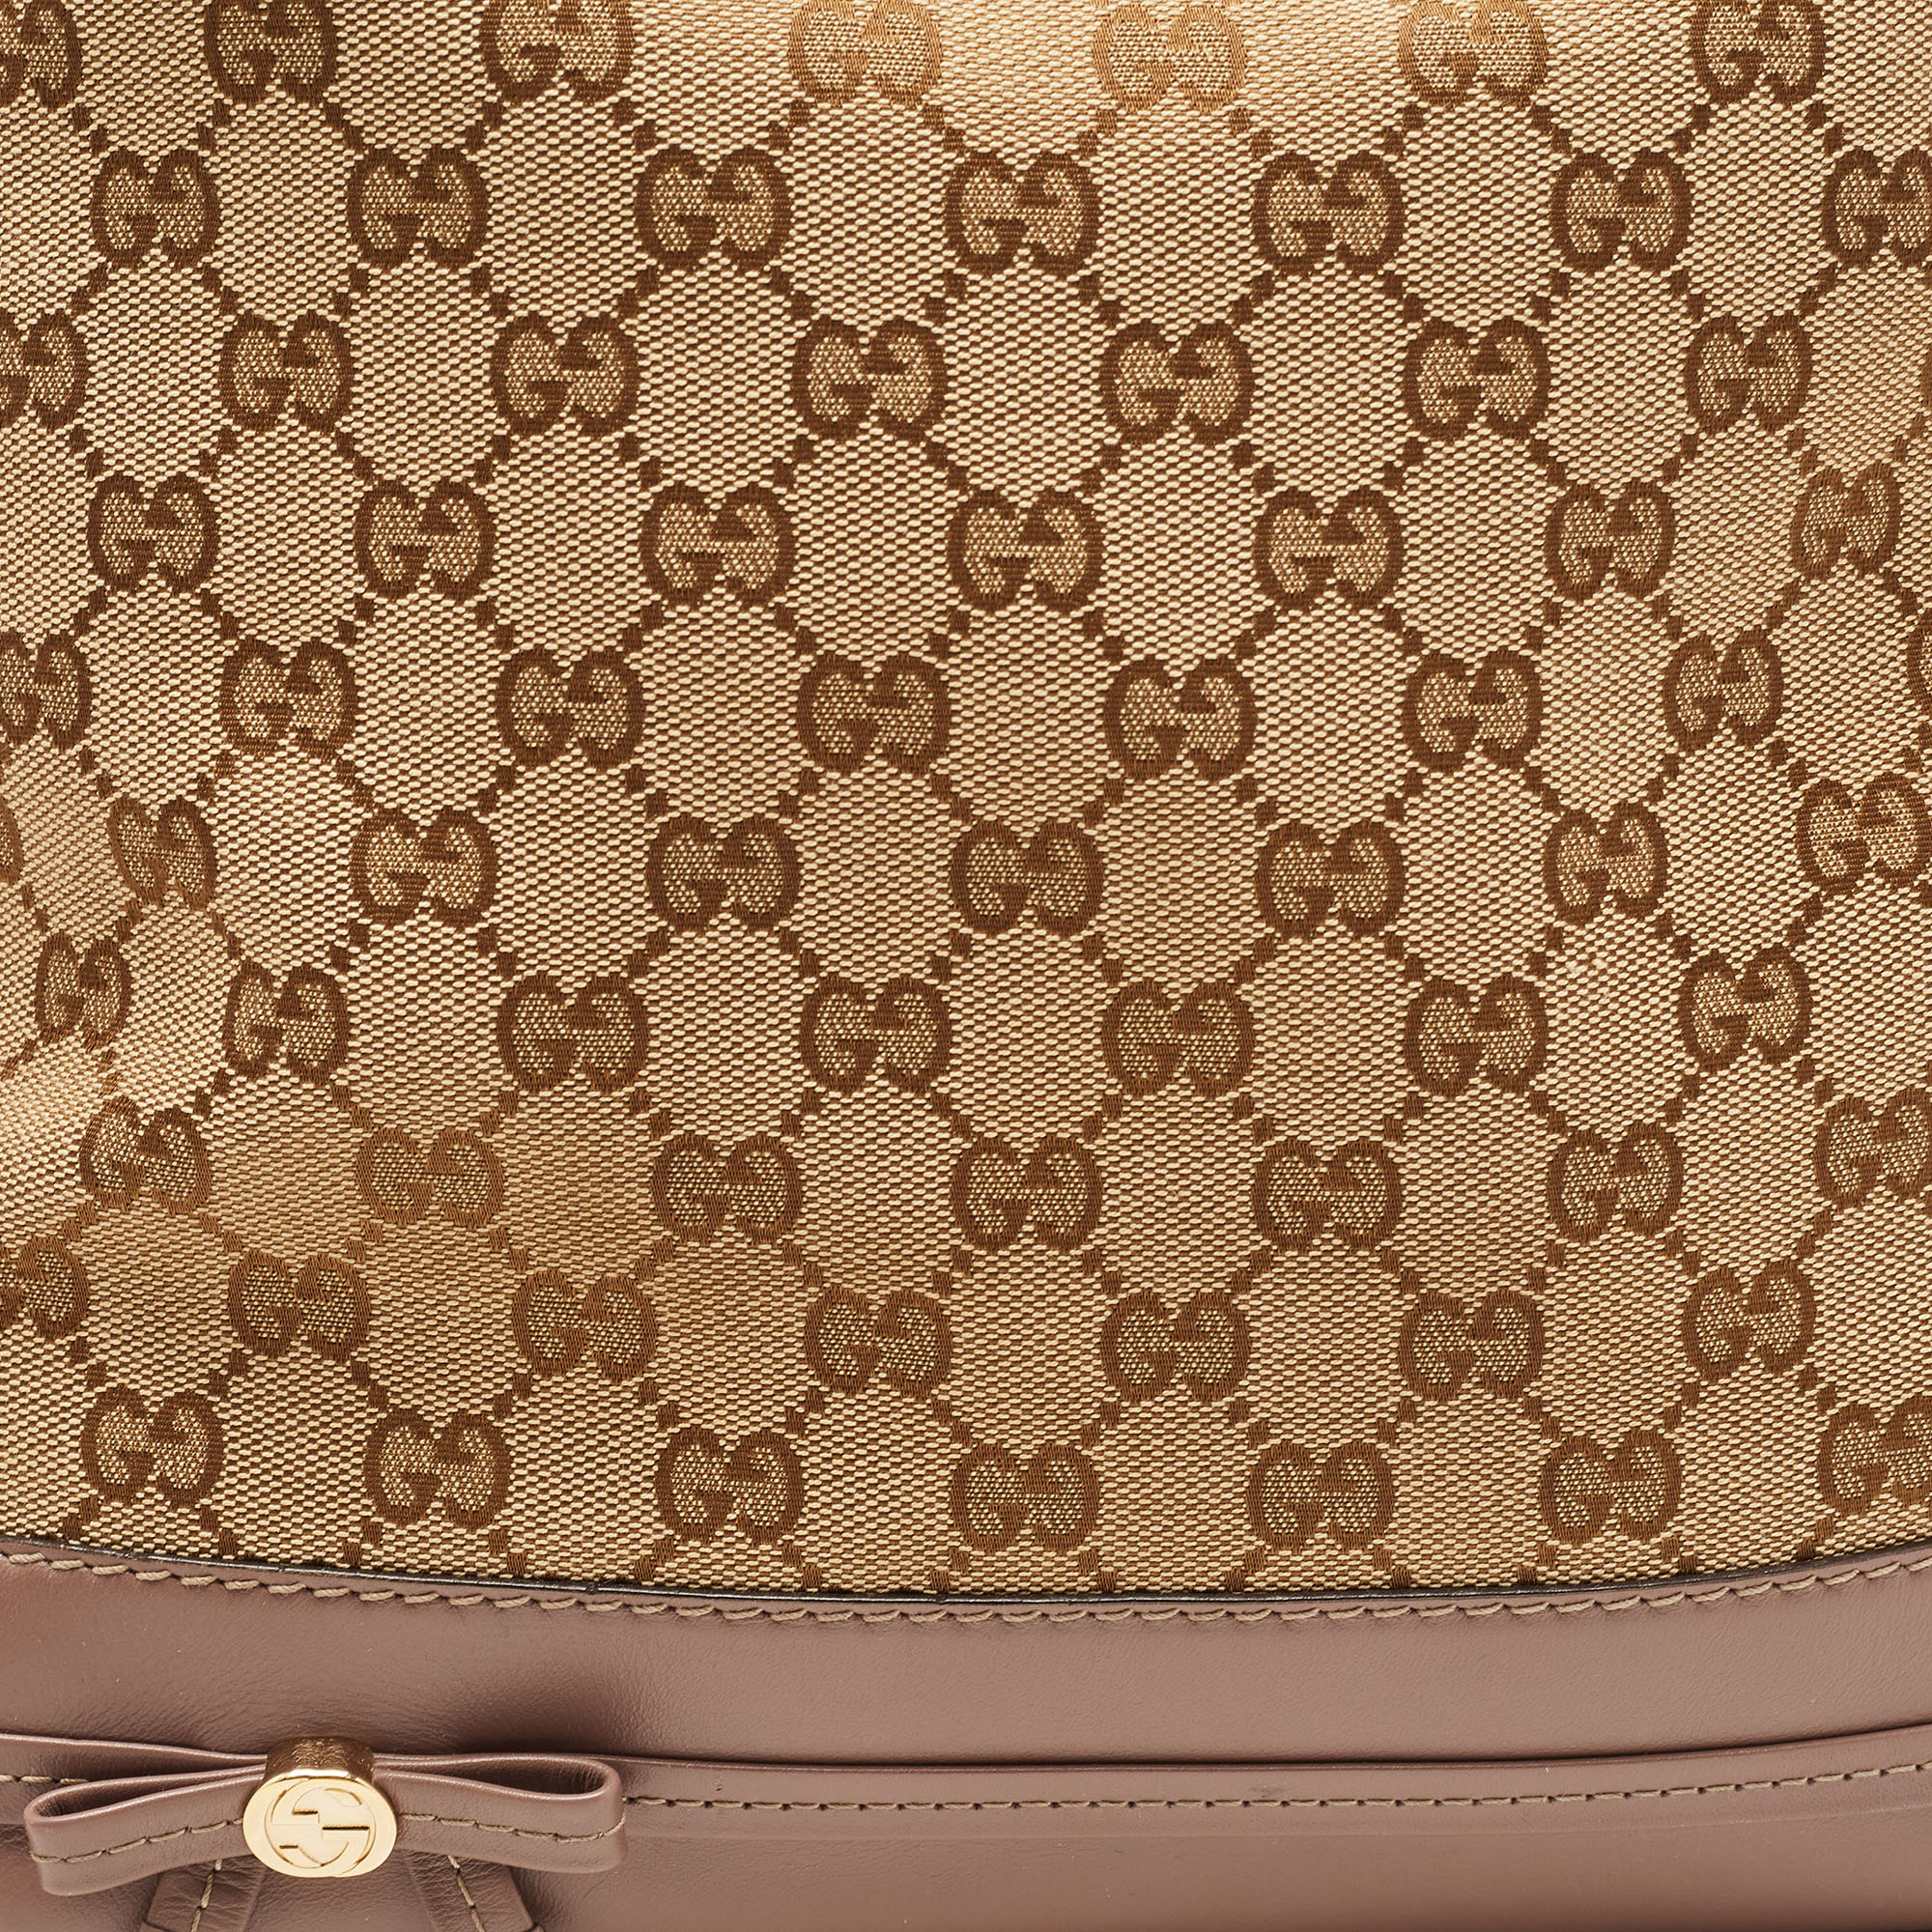 Gucci Dark Beige/Beige GG Canvas And Leather Mayfair Hobo